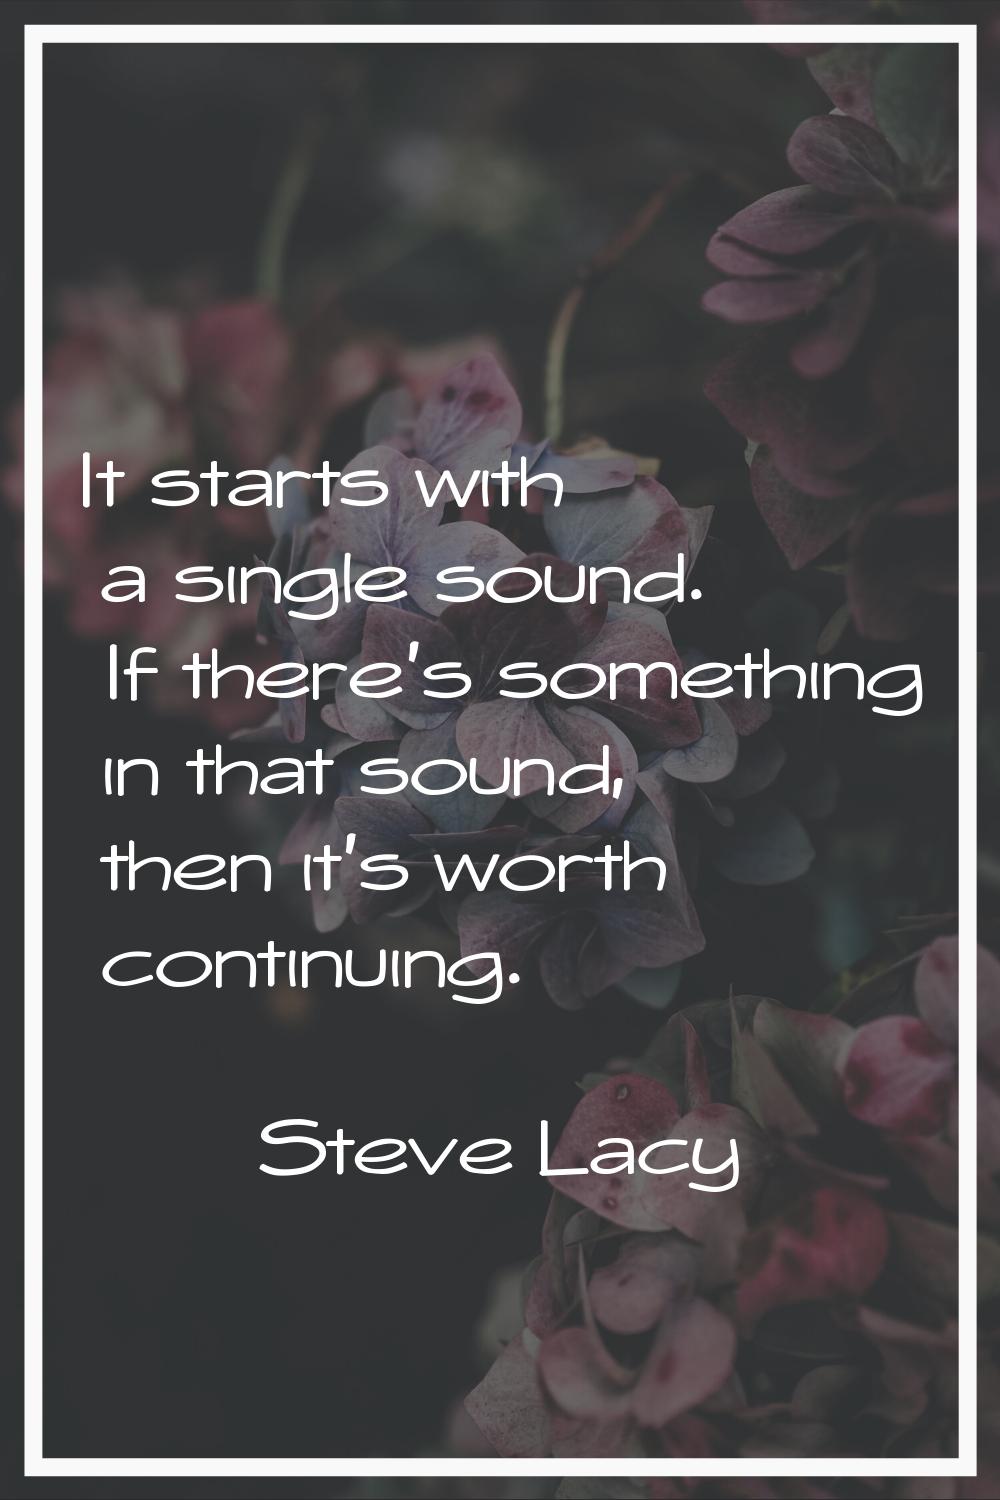 It starts with a single sound. If there's something in that sound, then it's worth continuing.